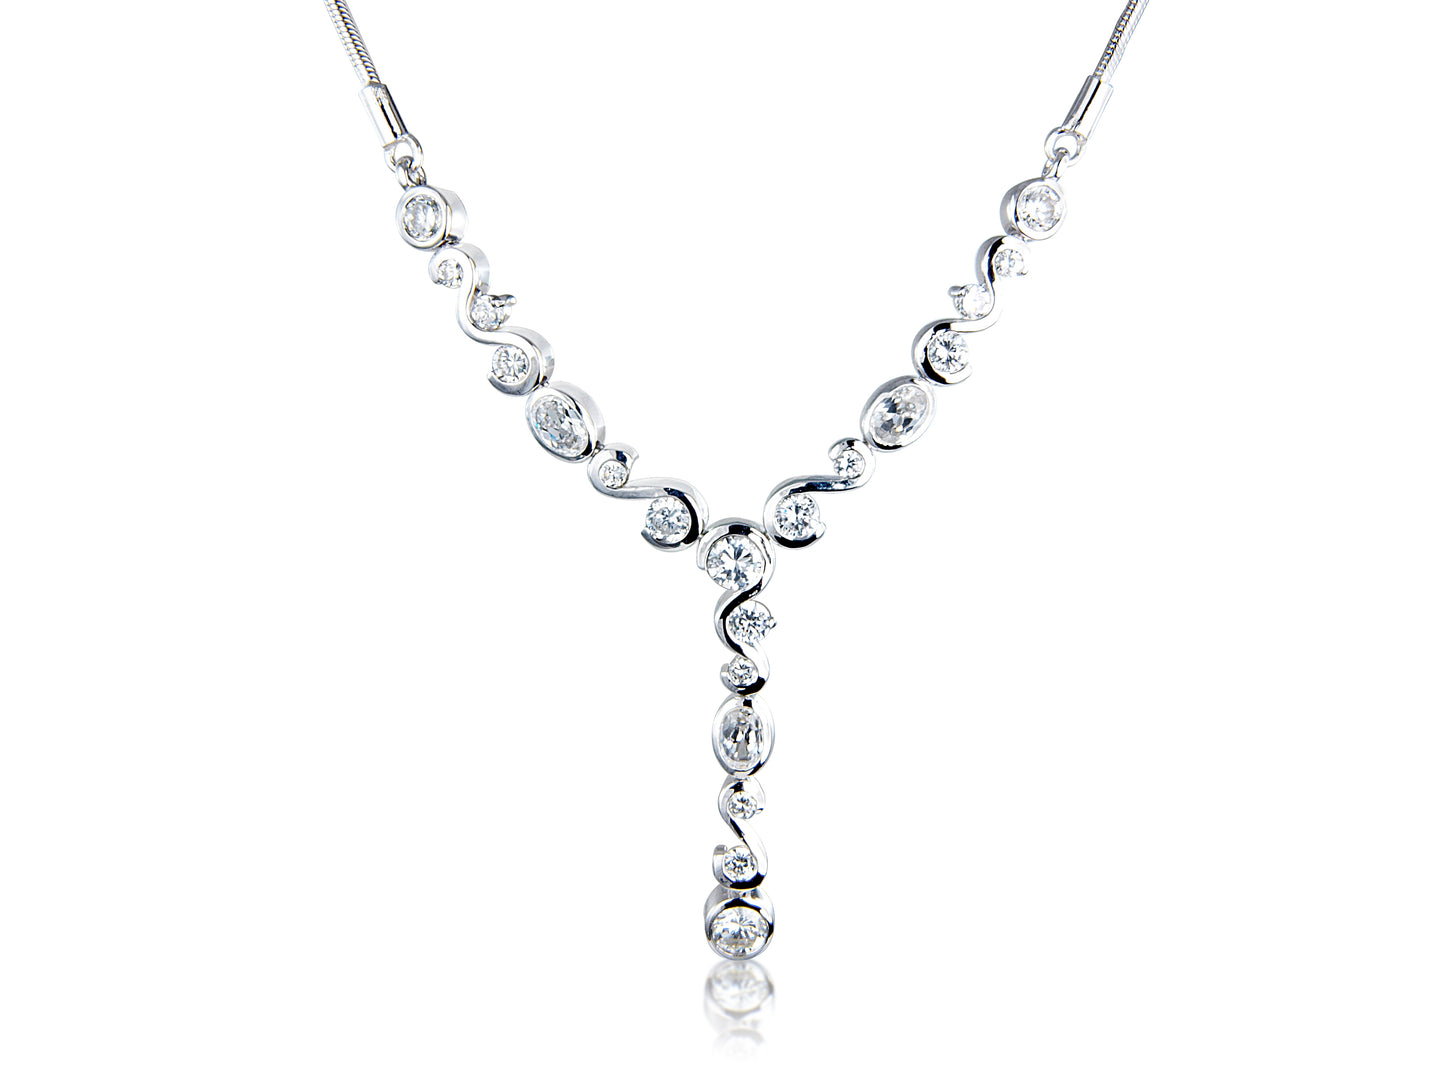 White Cubic Zirconia and Sterling Silver Necklace